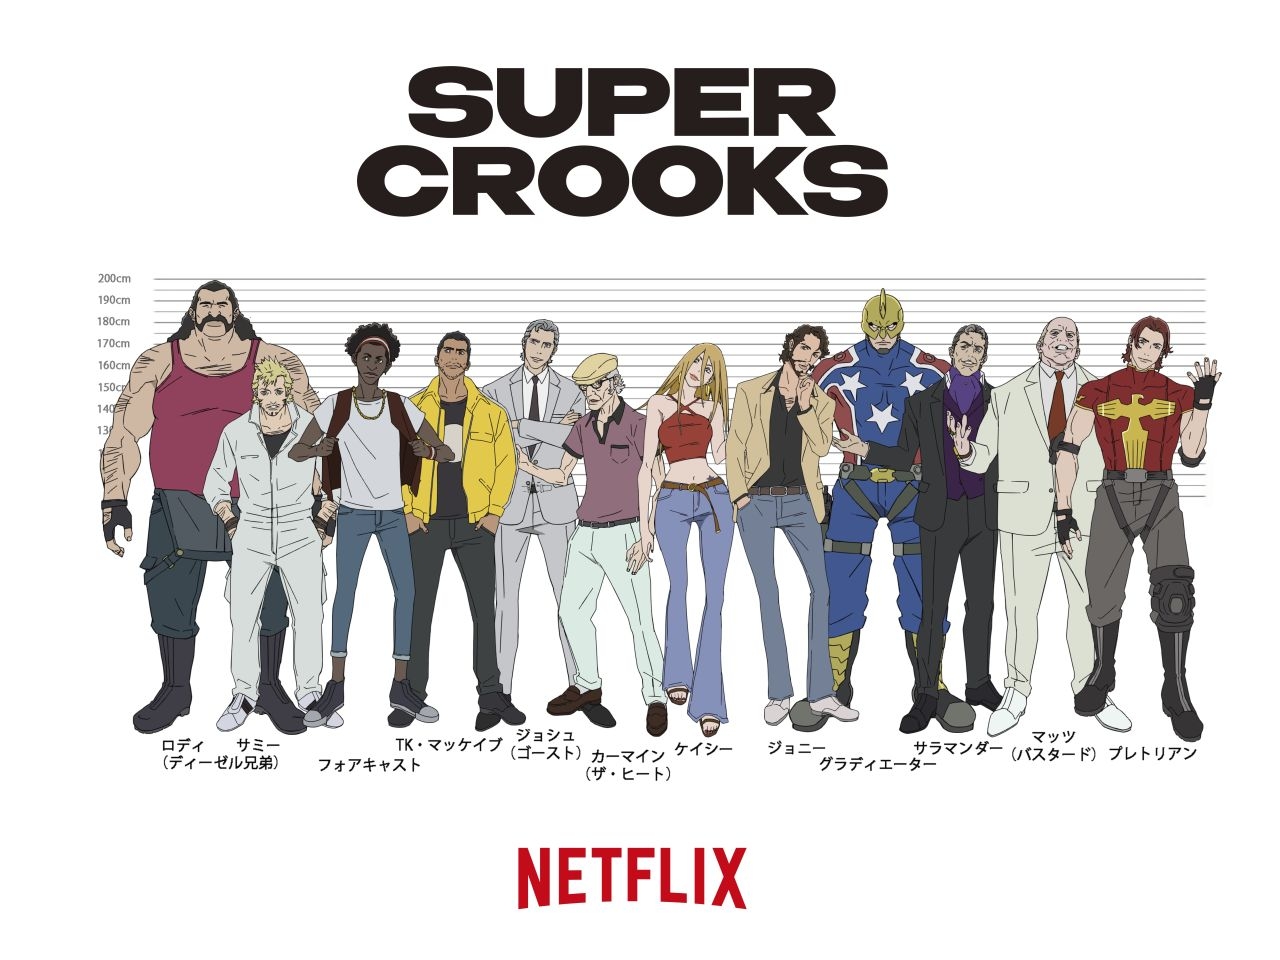 Netflix unveils slate of 40 anime titles headed by 'Record Of